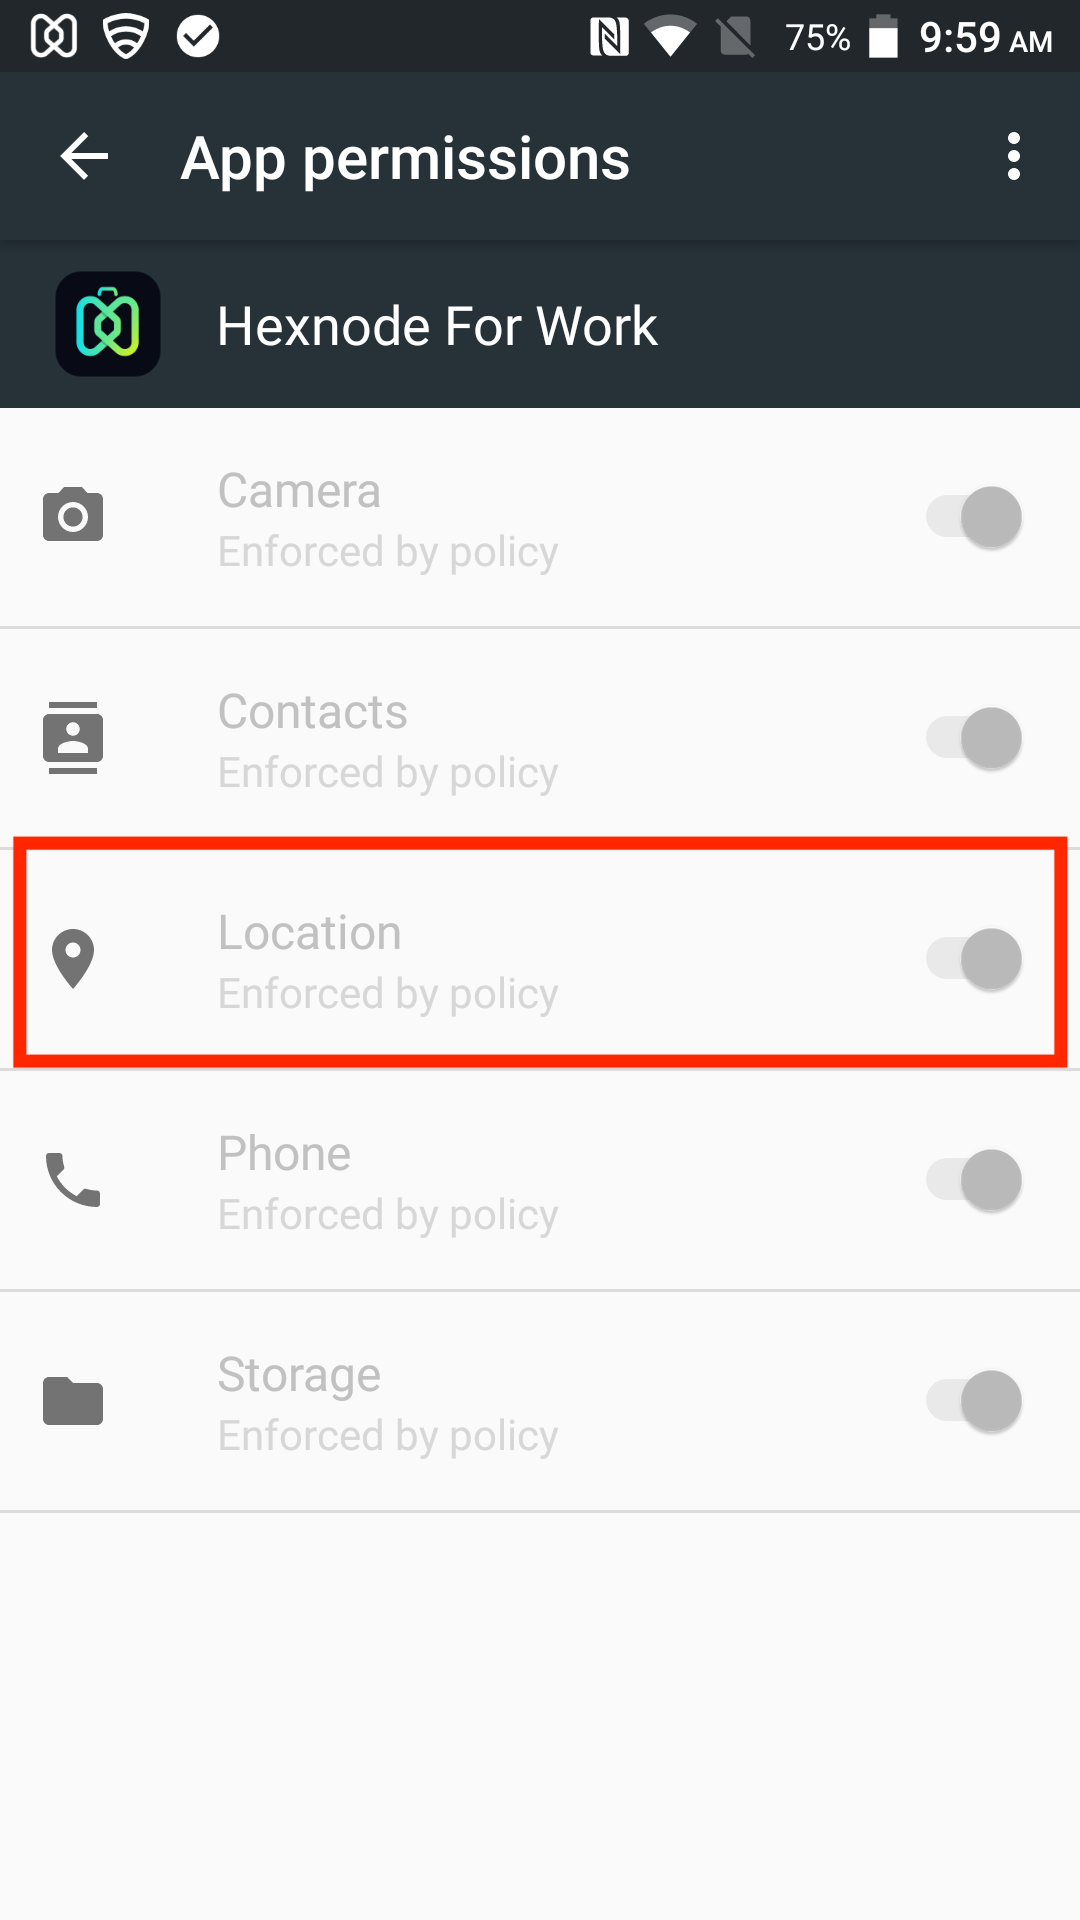 Enable Hexnode for Work app to access device location using app permissions